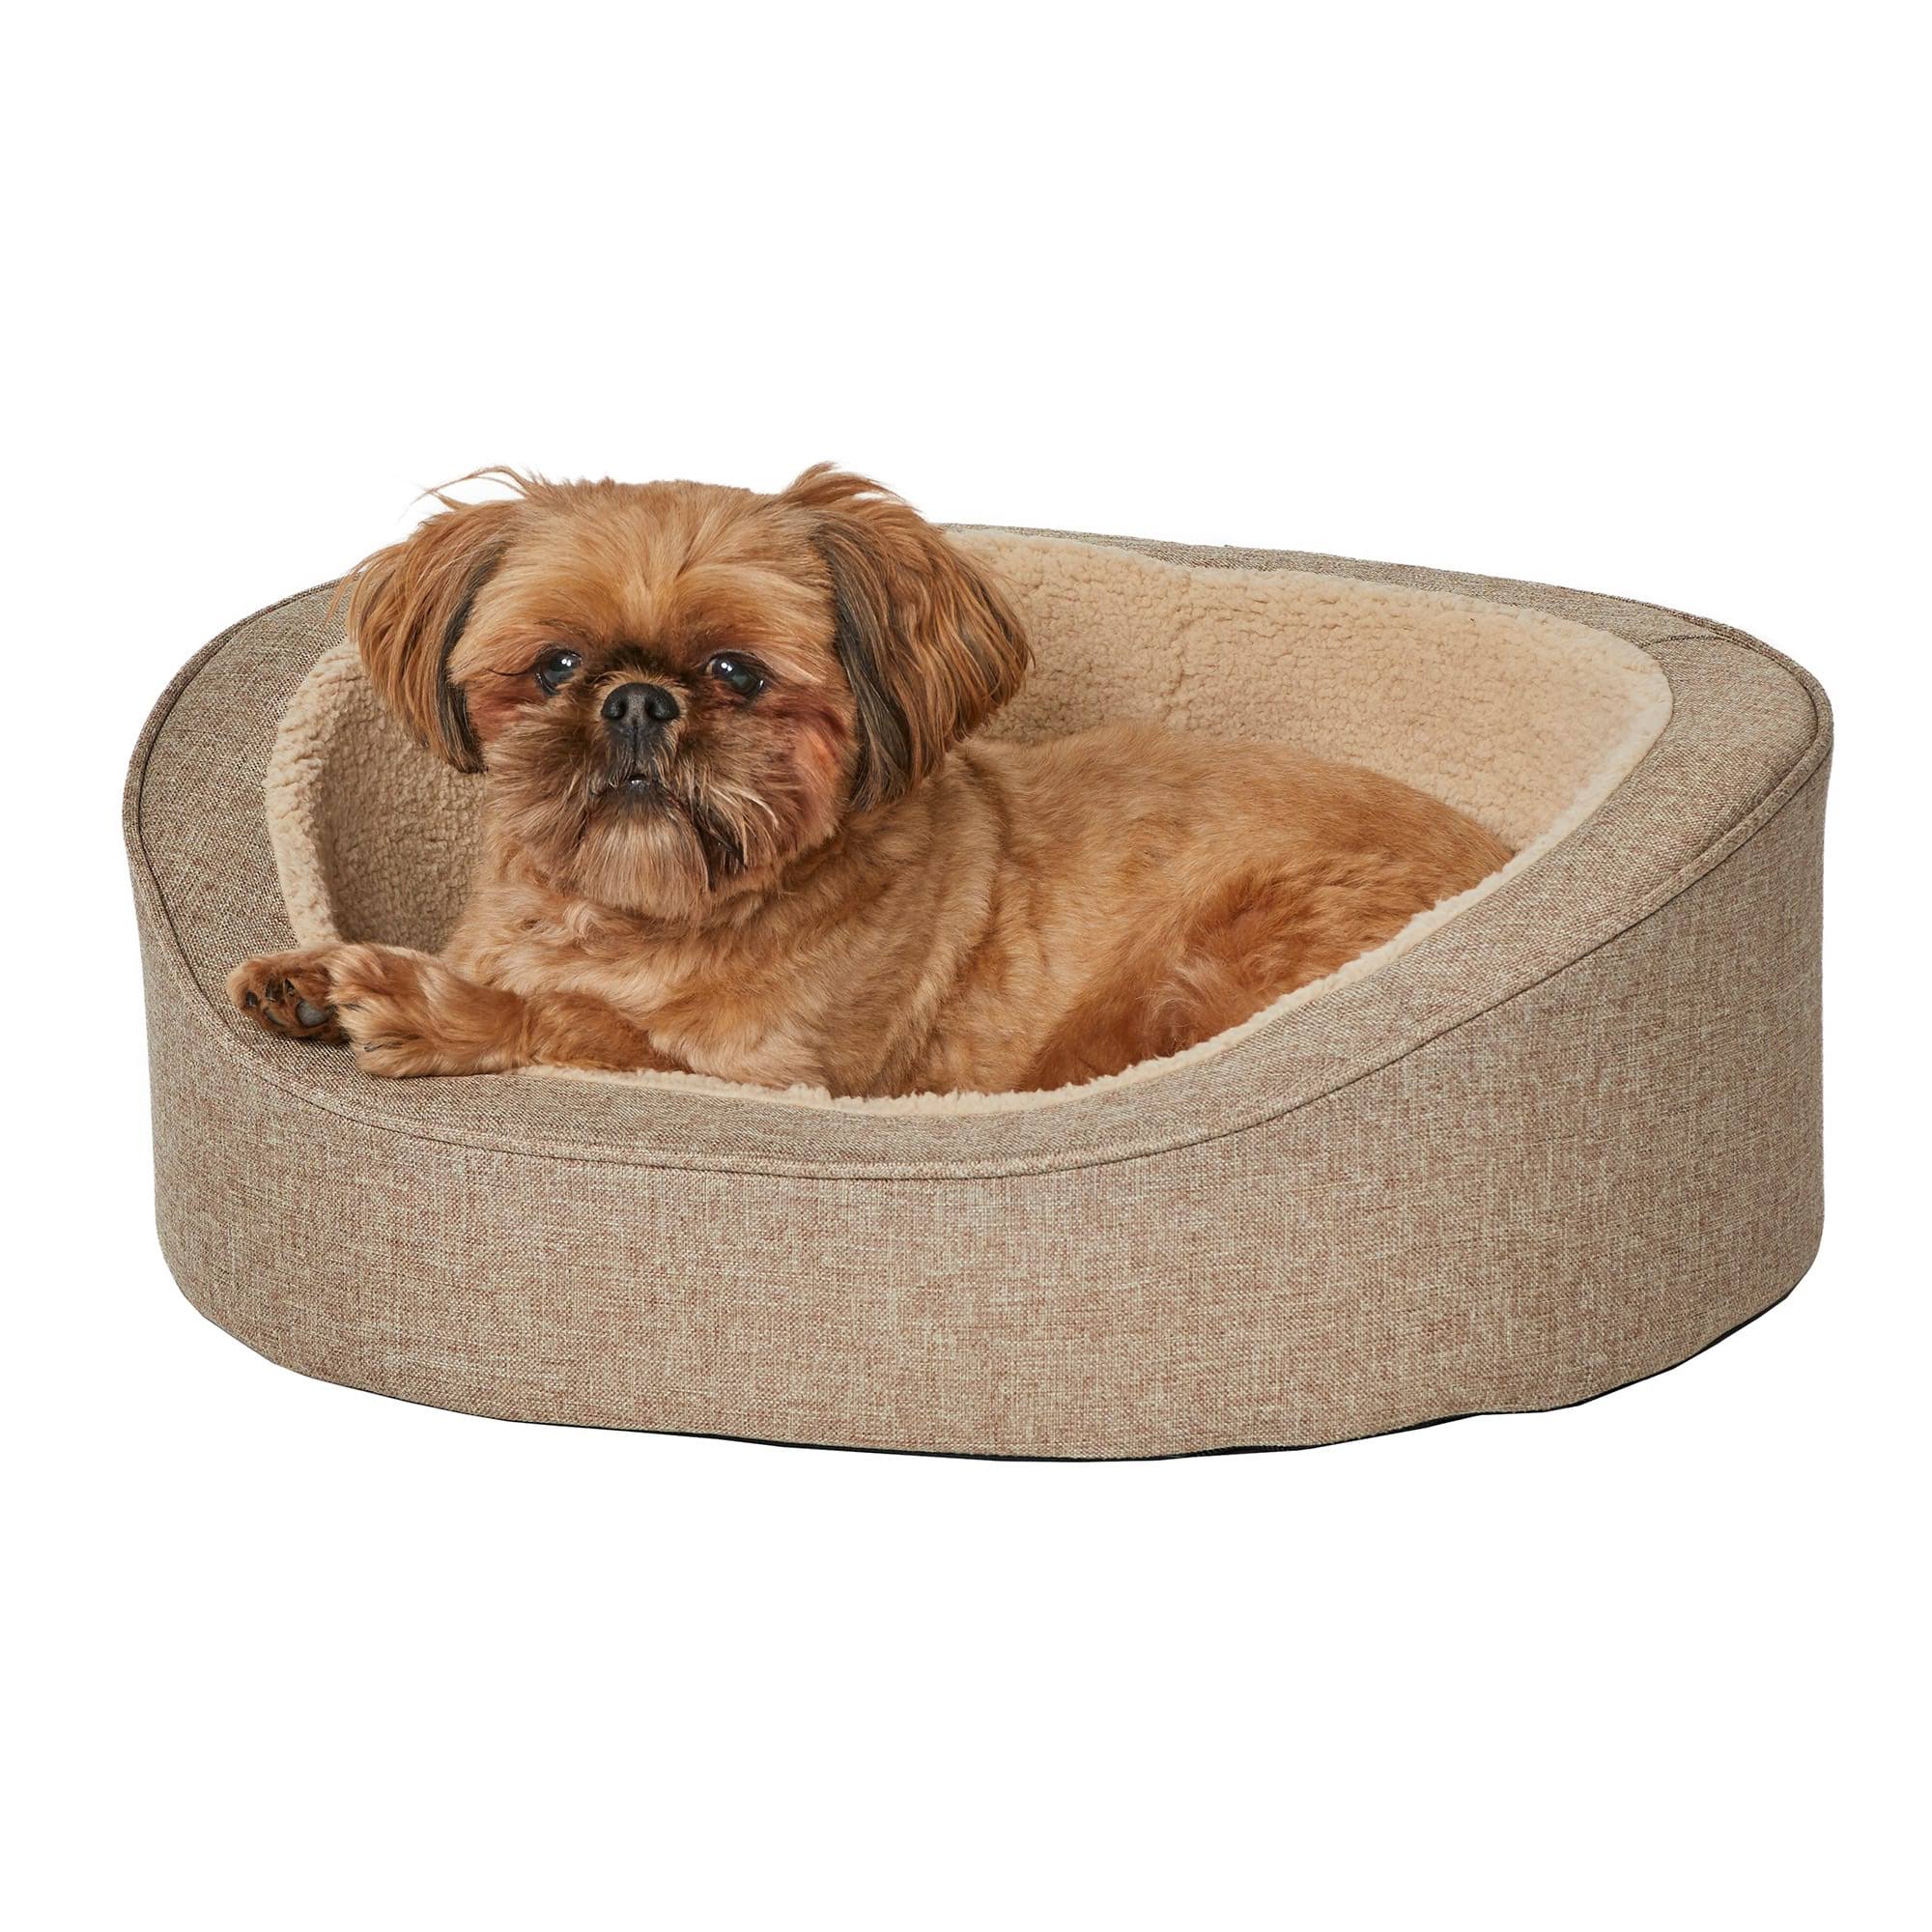 Midwest - Quiet Time - Hudson Deluxe Pet Bed - Tan - x Small